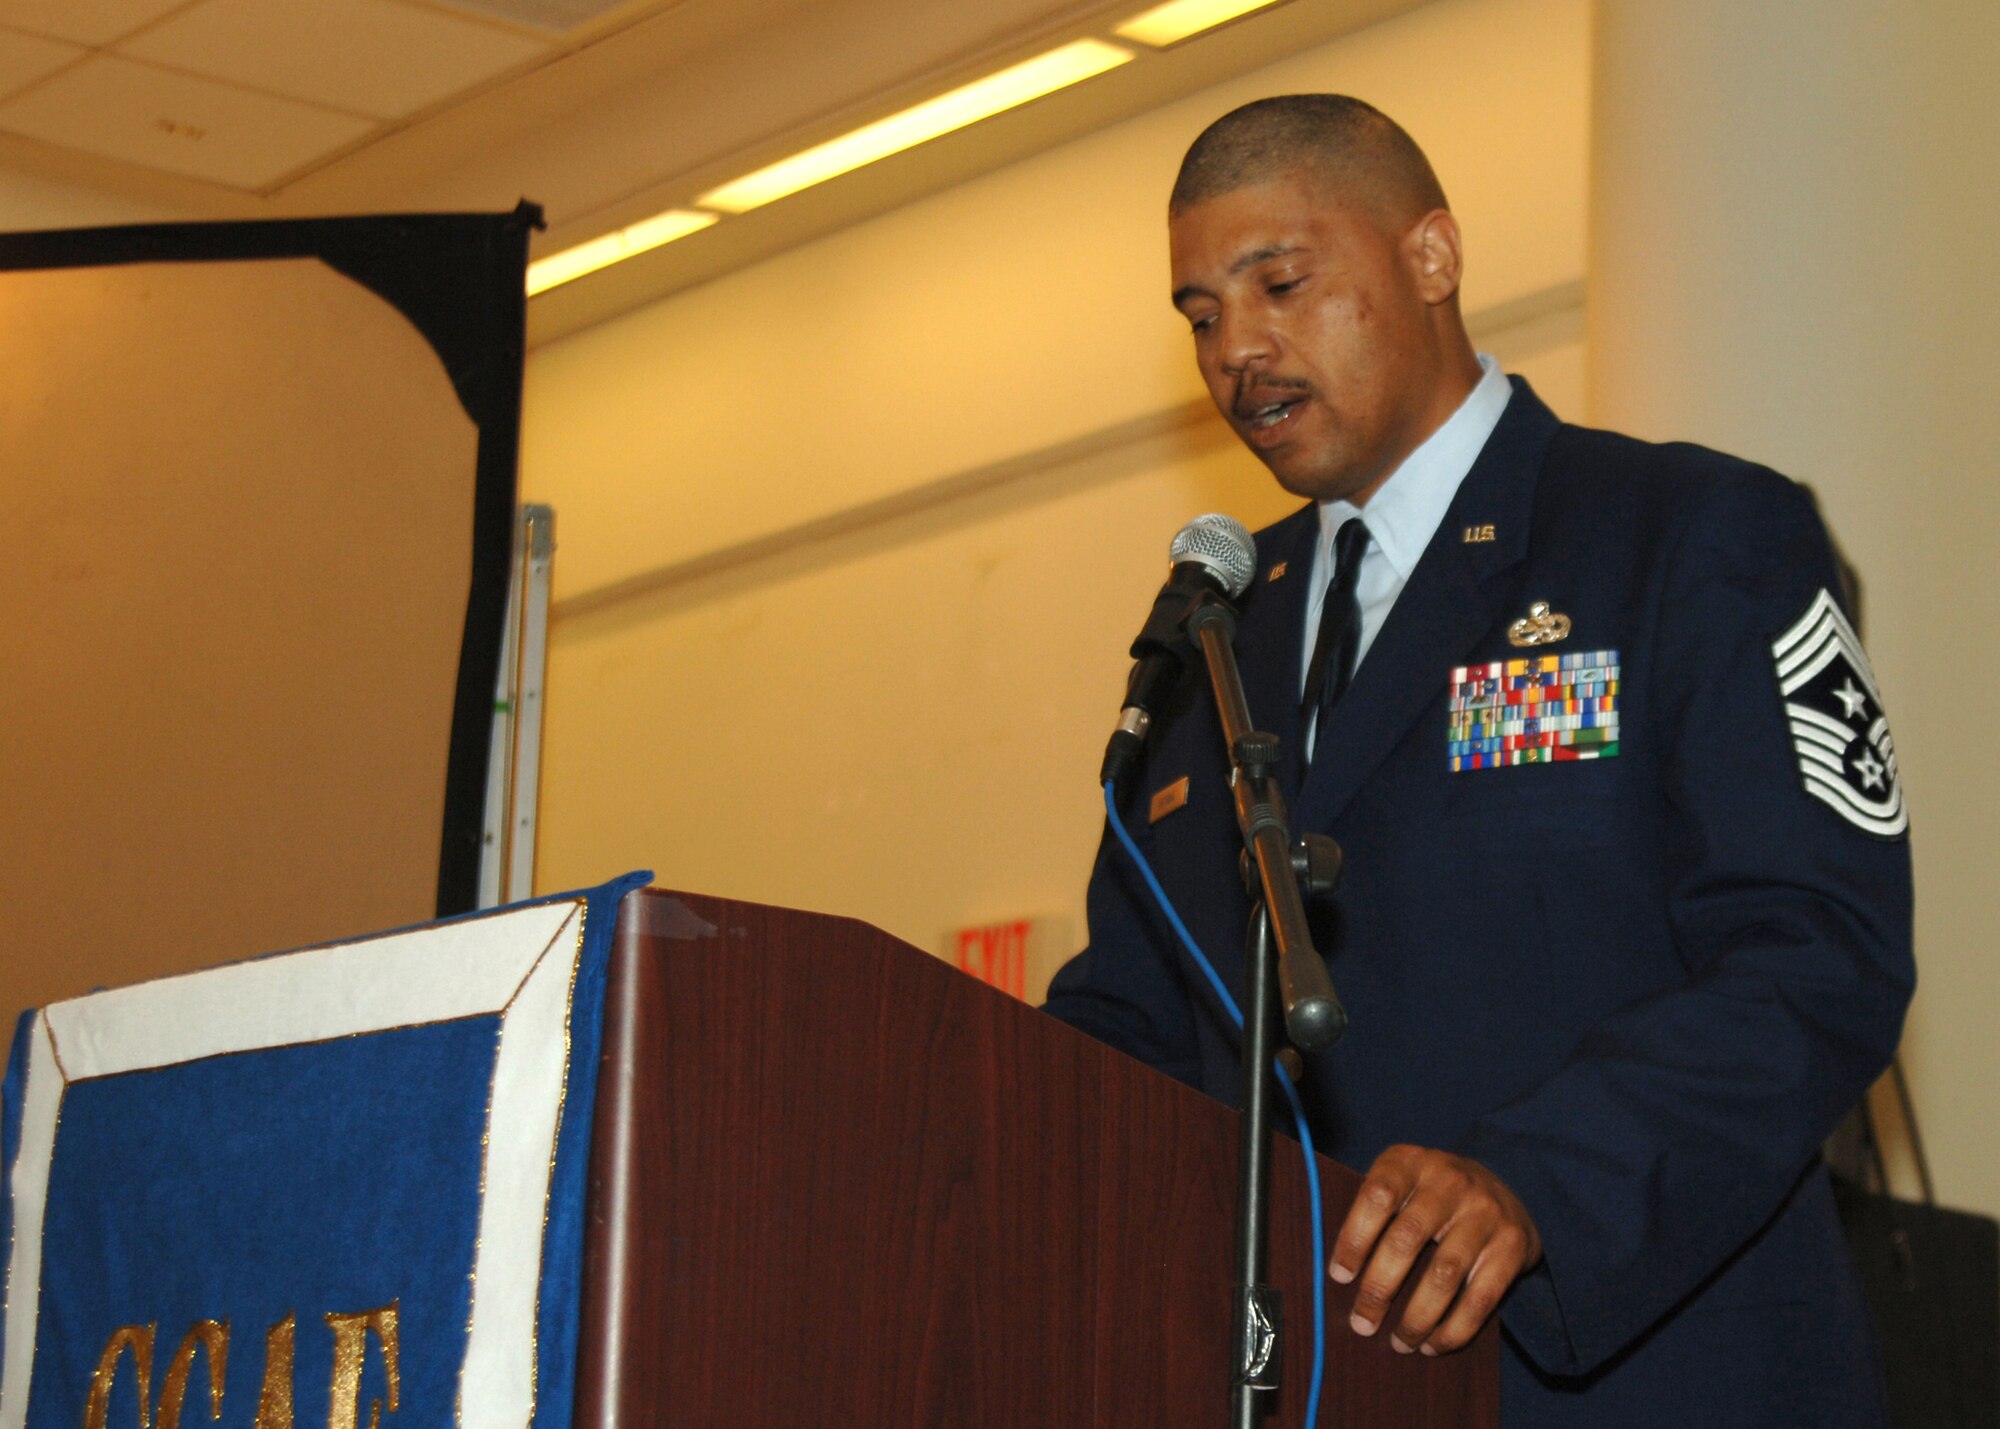 Chief Master Sgt. Jeffrey A. Antwine, 39th Air Base Wing command chief, speaks at the Community College of the Air Force graduation ceremony held at the Incirlik Club Complex, Dec. 15. (U.S. Air Force photo by Airman 1st Class Kelly L. LeGuillon)